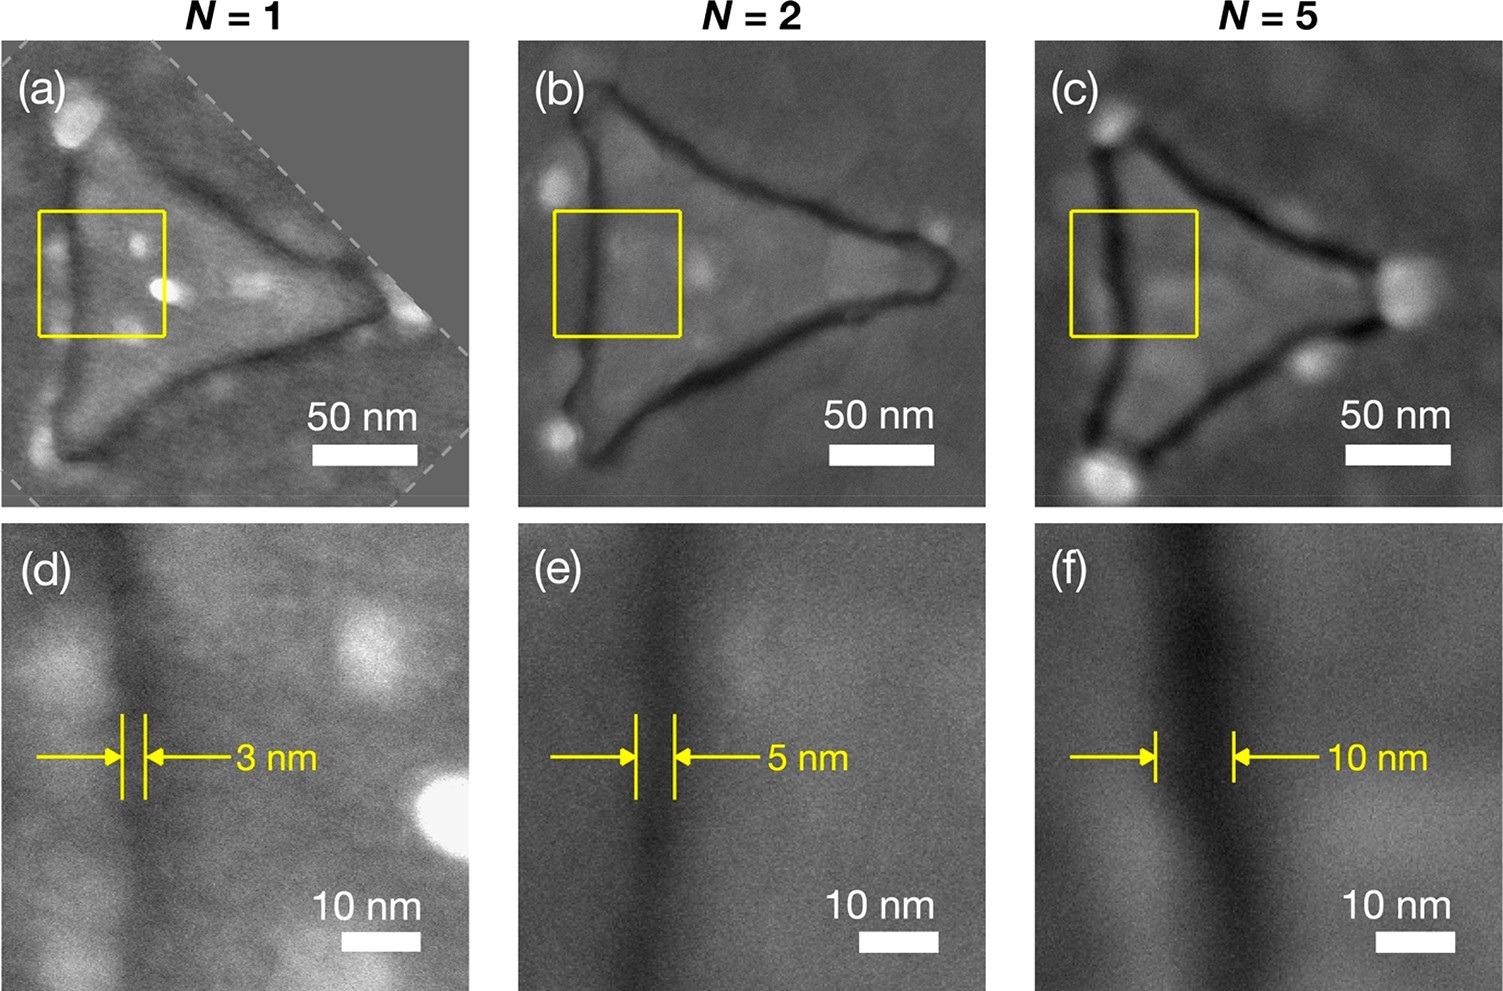 High-resolution SEM images of triangular Au/Au nanogaps. (a)–(c) SEM images showing a single triangular nanogap in an N = 1 (a), N = 2 (b), and N = 5 (c) TNG array. The yellow boxes enclose square regions of length 60 nm. The dotted white lines in (a) indicate the edge of the SEM image, which has been rotated to bring the left edge of the triangle into vertical alignment. (d)–(f) Magnified sections of the SEM images from (a)–(c), showing the yellow boxed regions. The approximate gap widths are 3, 5, and 10 nm for the N = 1 (d), N = 2 (e), and N = 5 (f) TNG arrays.